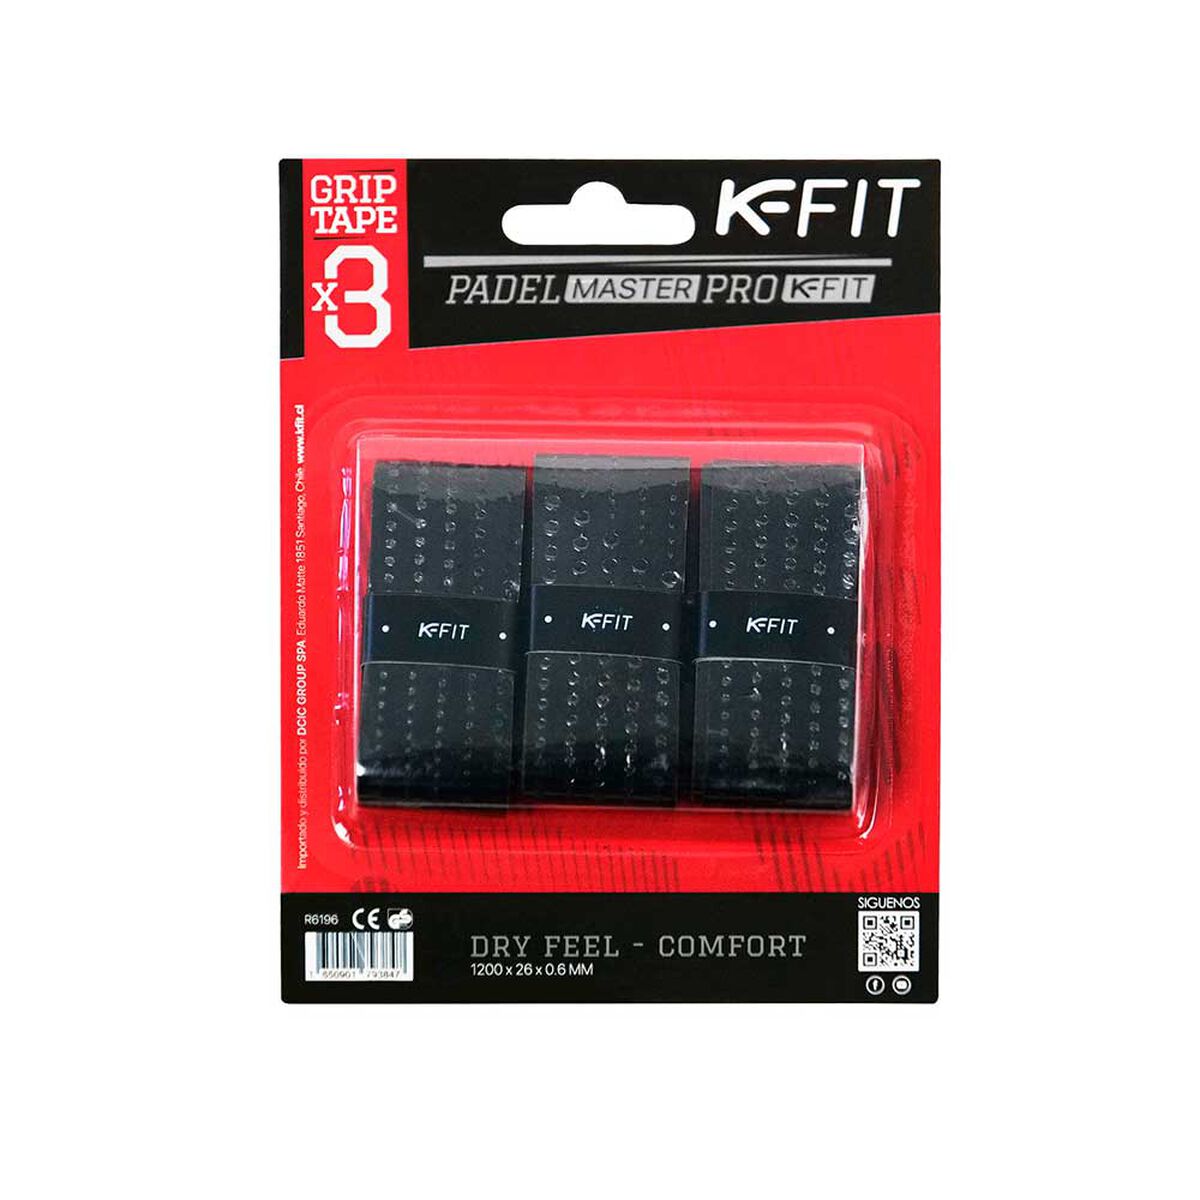 Over Gripp K-FIT Negro Pack 9 Unidades